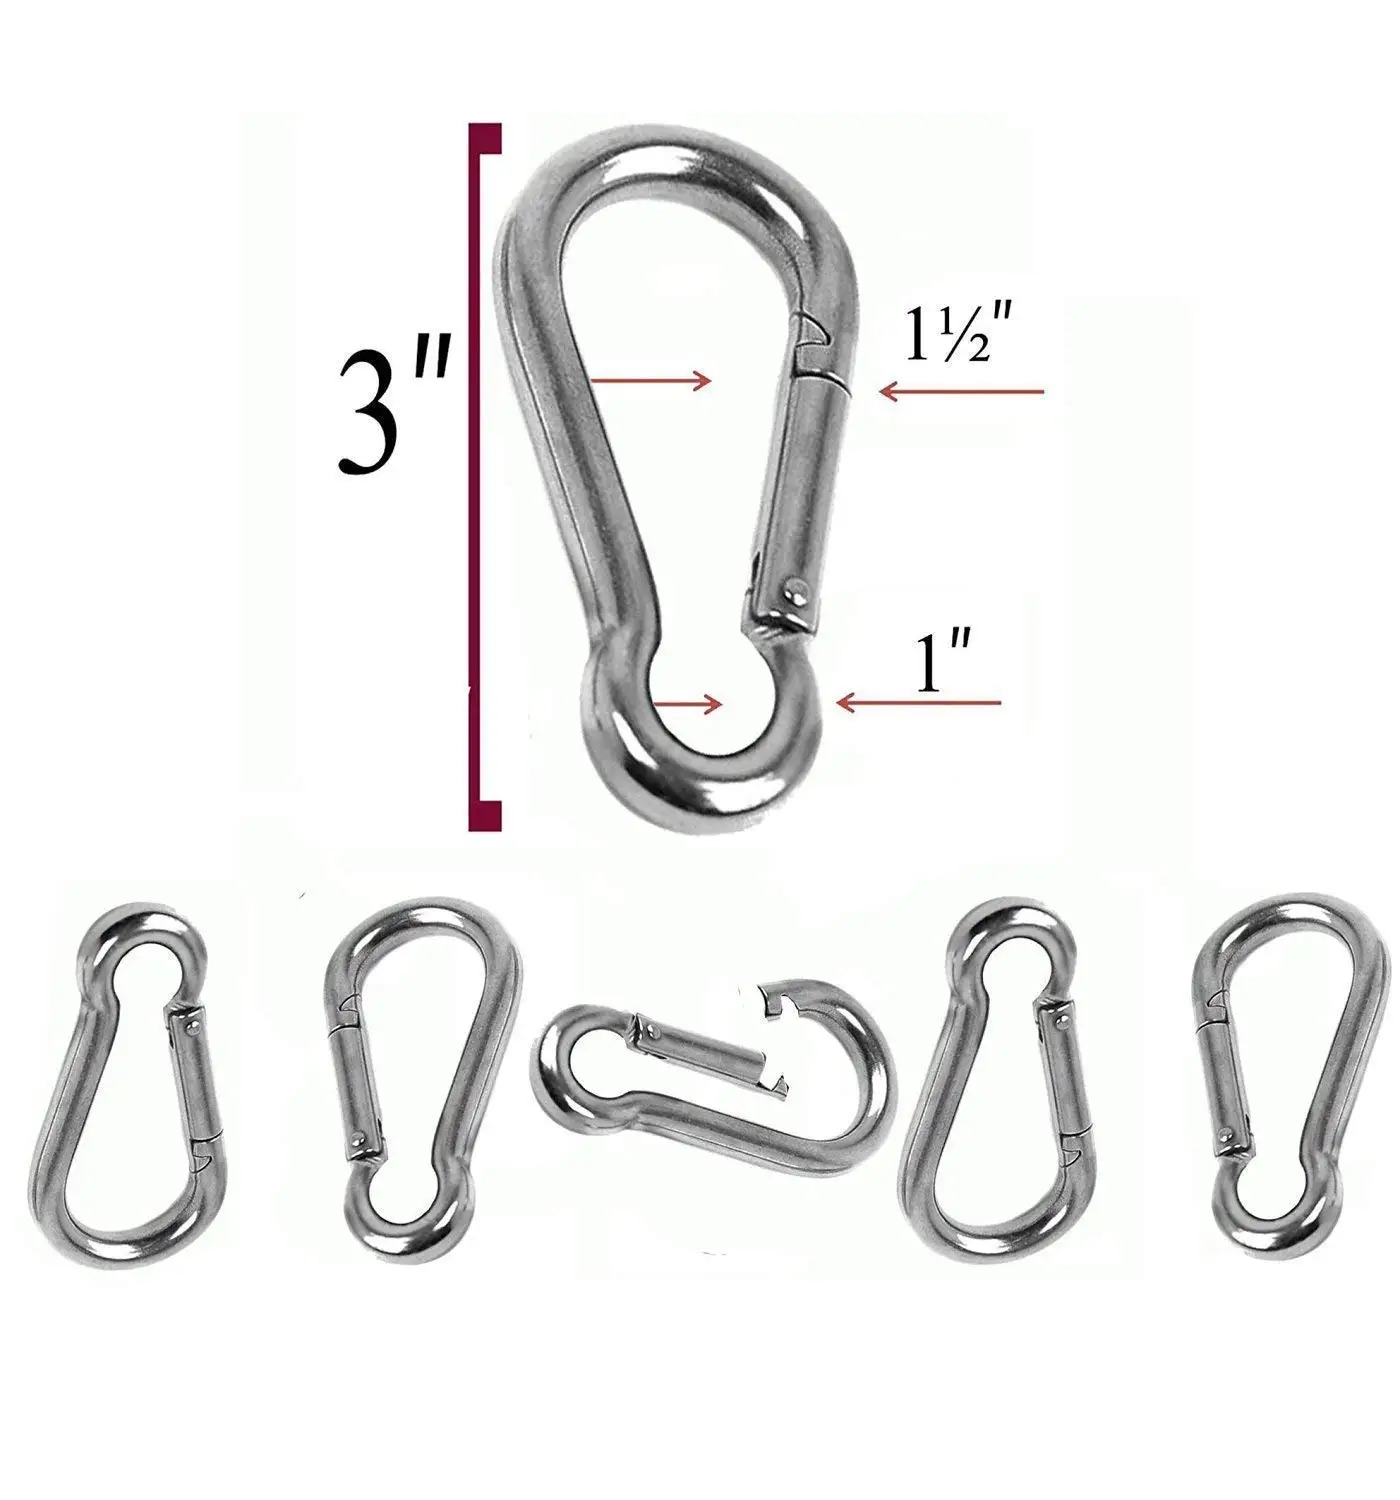 Holds up to 1000Lbs 1pcs,2pcs,4pcs Moonight Stainless Steel 304 Spring Snap Hook Carabiner Screw Lock Perfect Tire /& Disc Swings